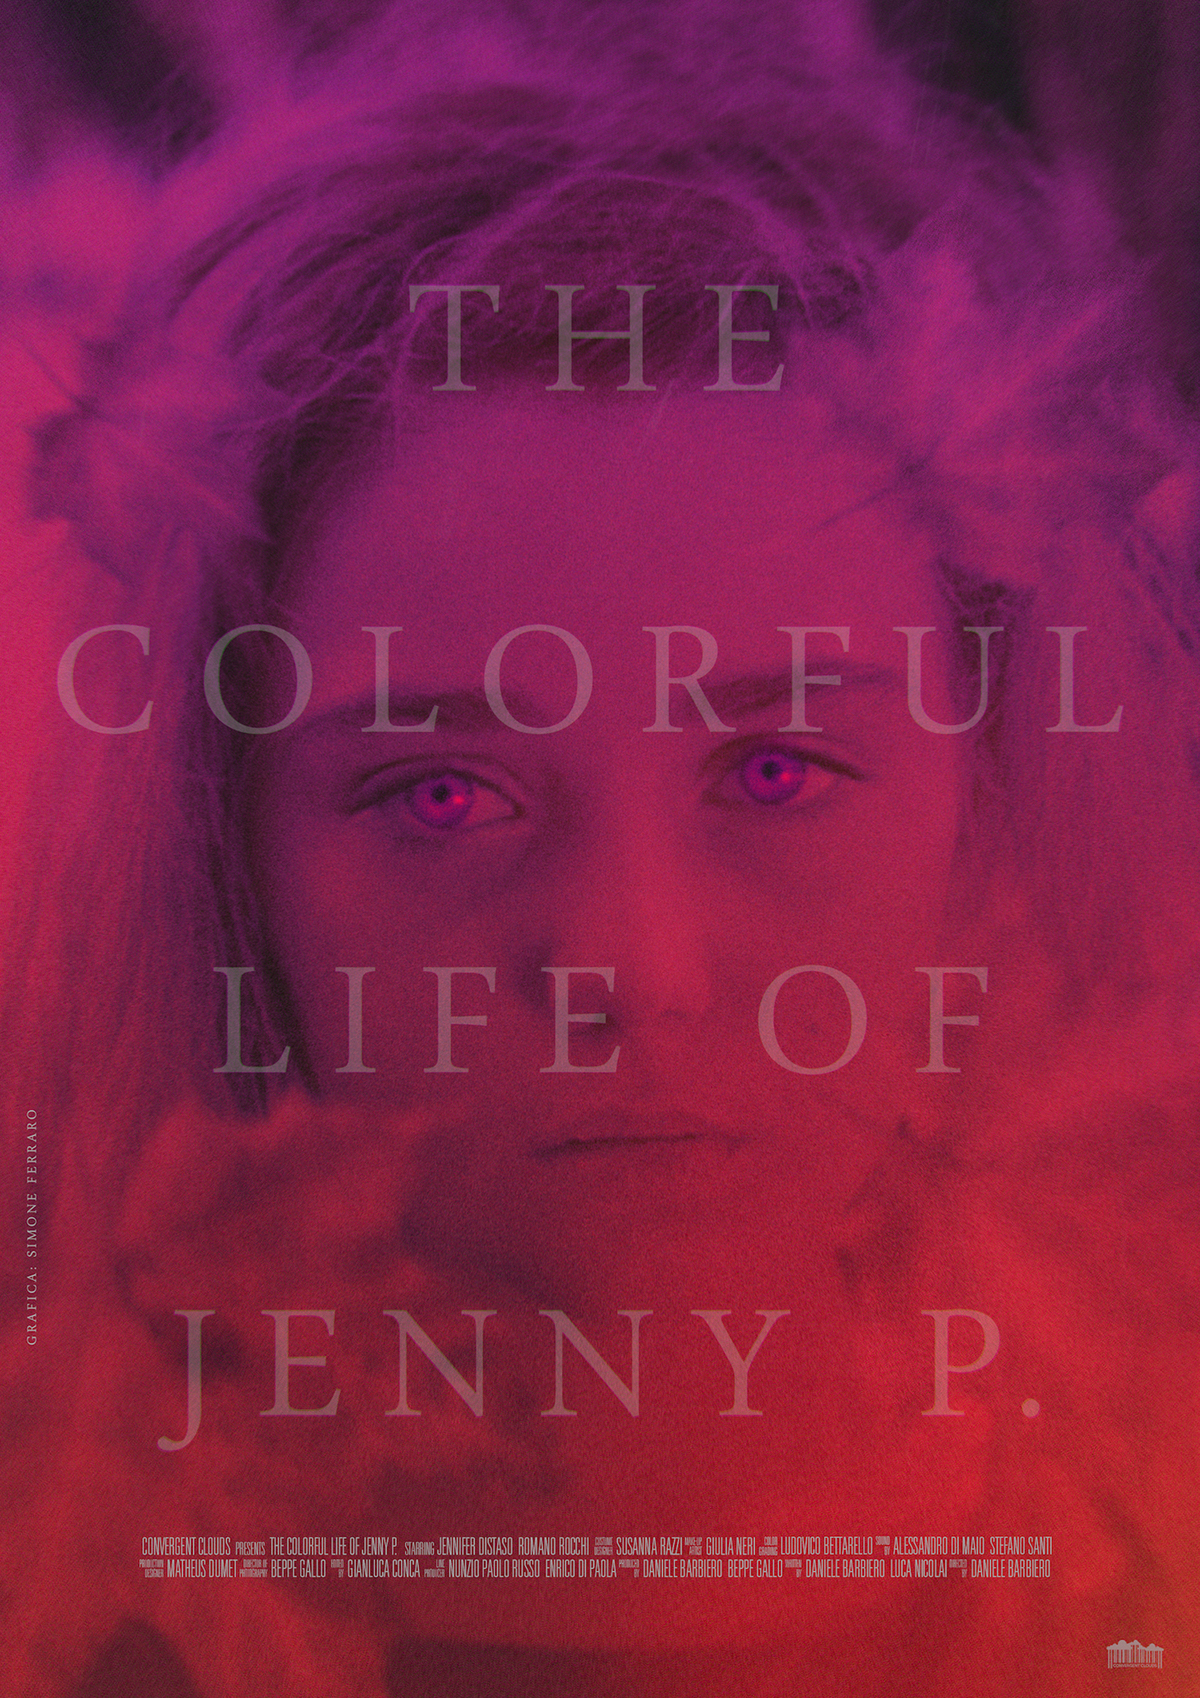 short movie poster indie colorful jenny p. convergent clouds